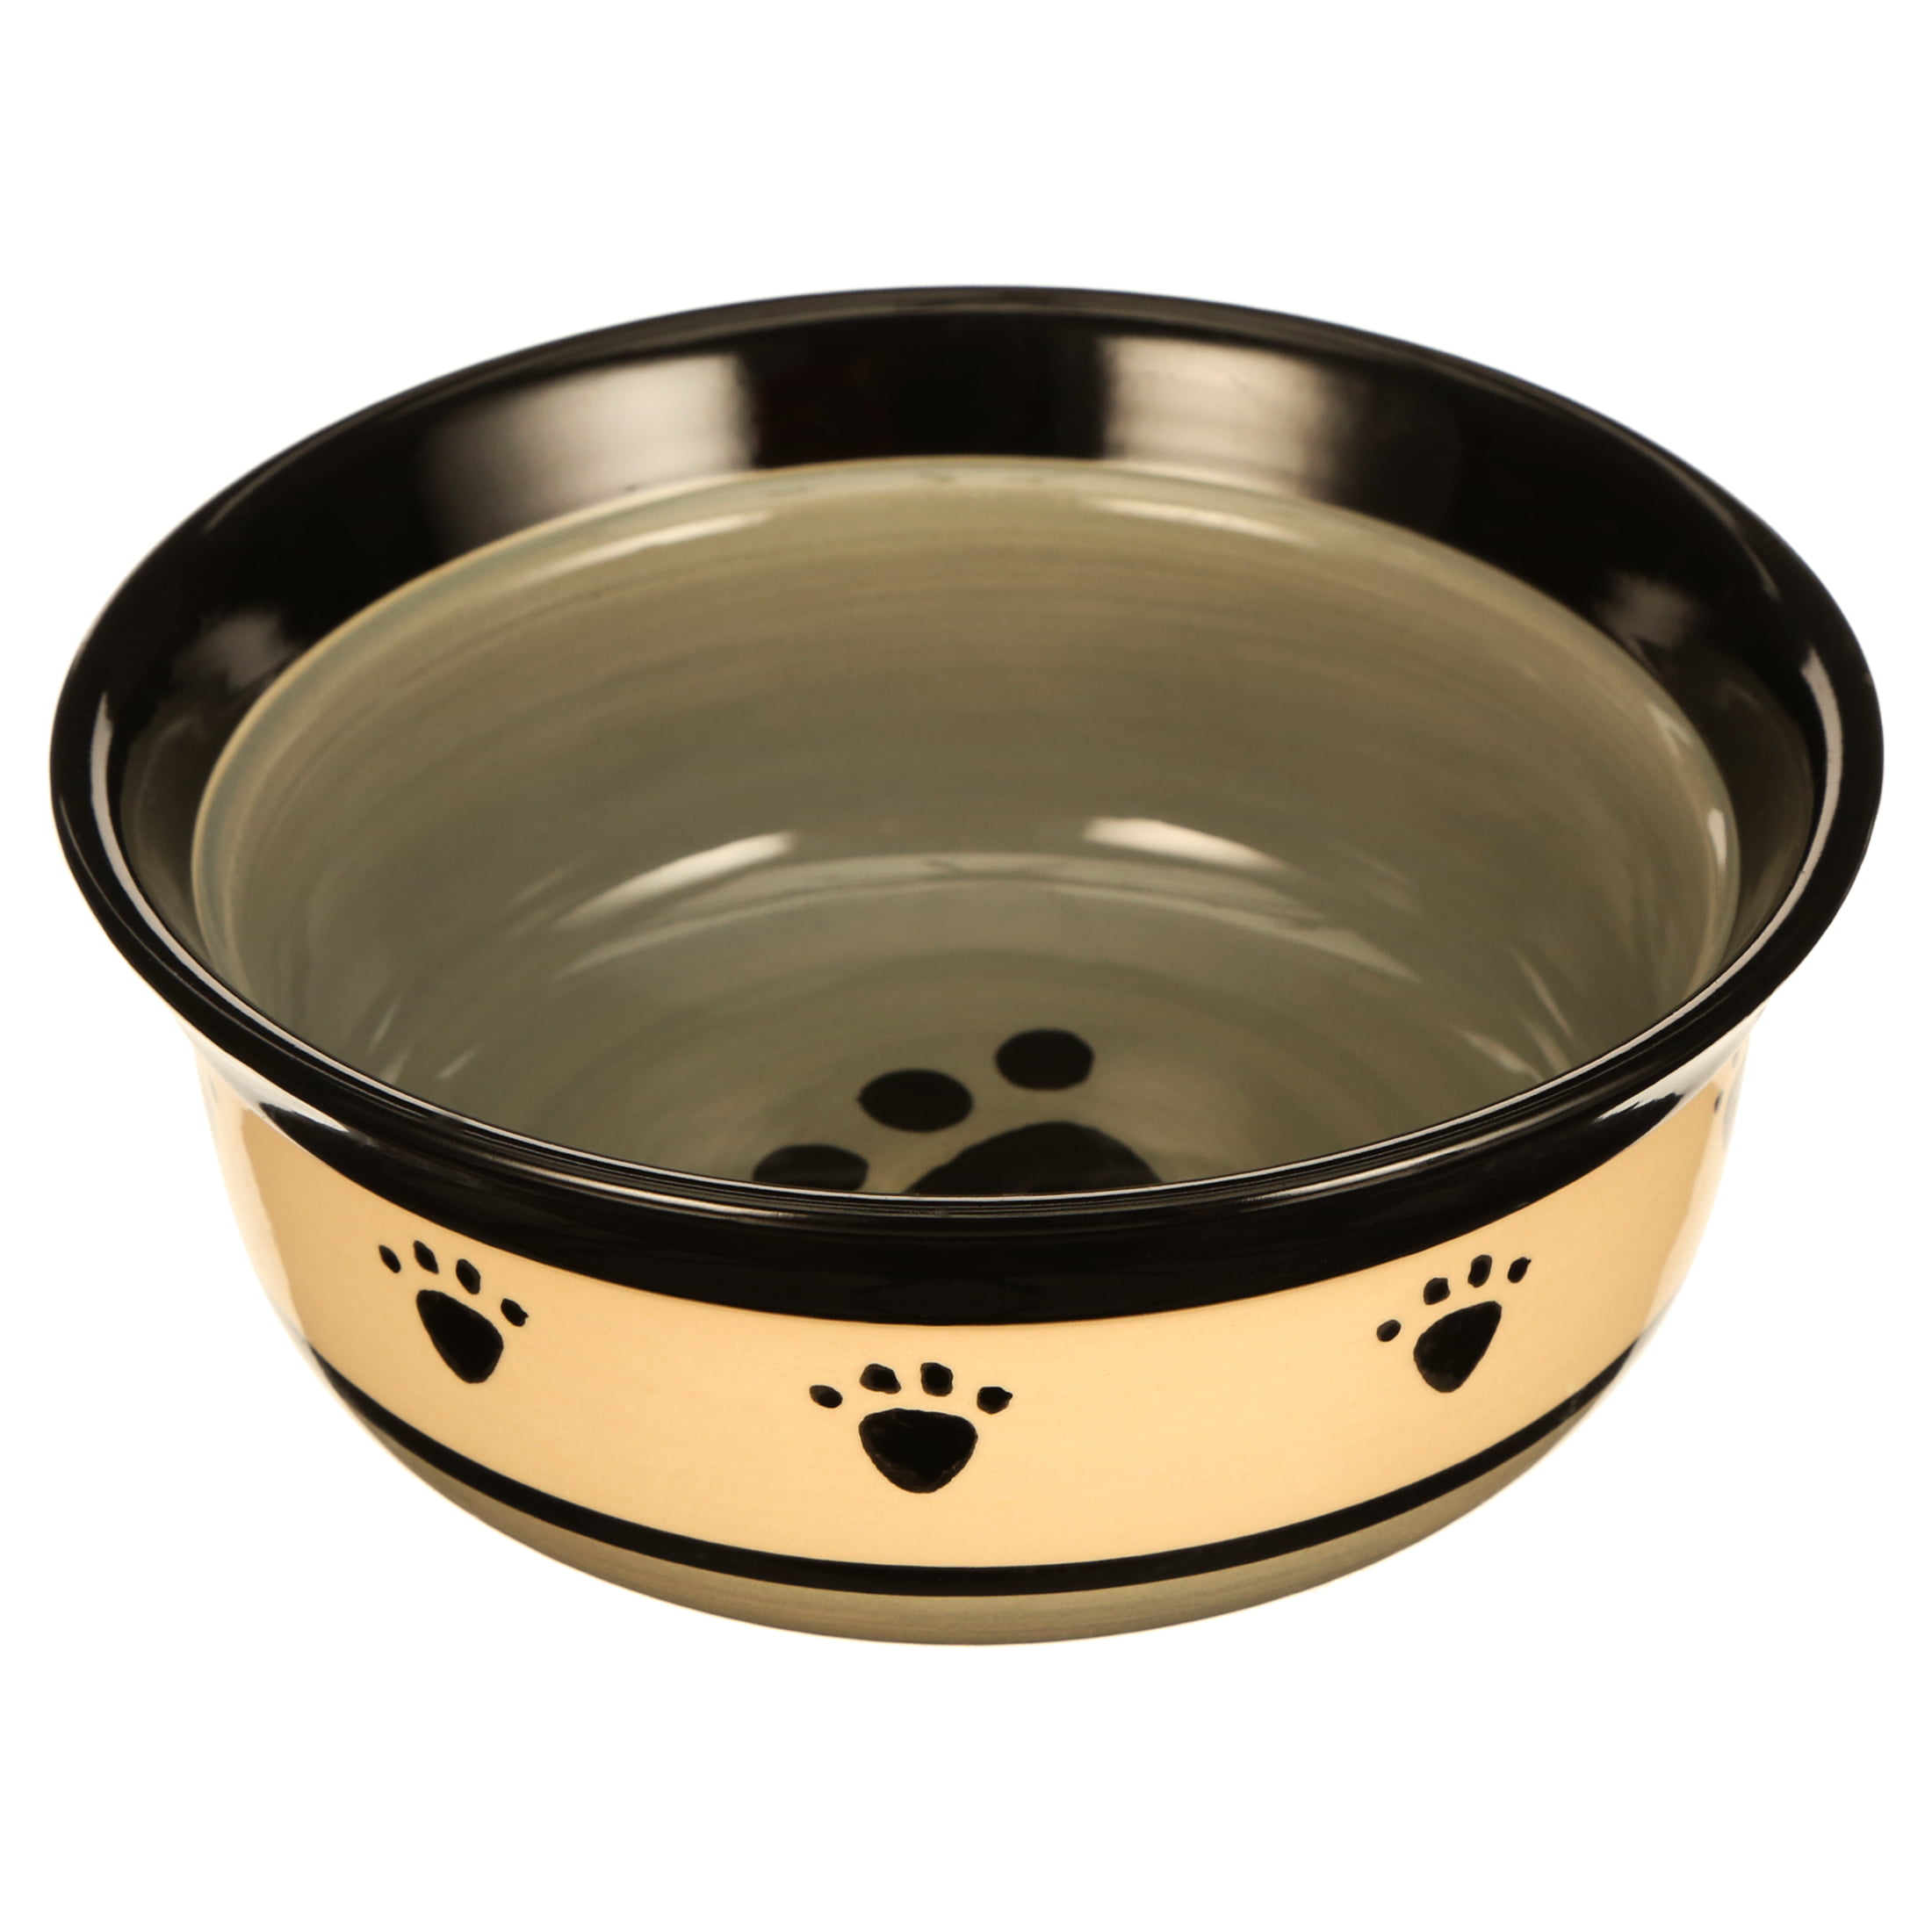 PetRageous 17000 Eat Drink Repeat Two-Tone Stoneware Dishwasher Safe Dog Bowl 2-Cup 6-Inch Diameter 2.5-Inch Tall for Small and Medium Dogs and Cats Off-White 16-Ounce 